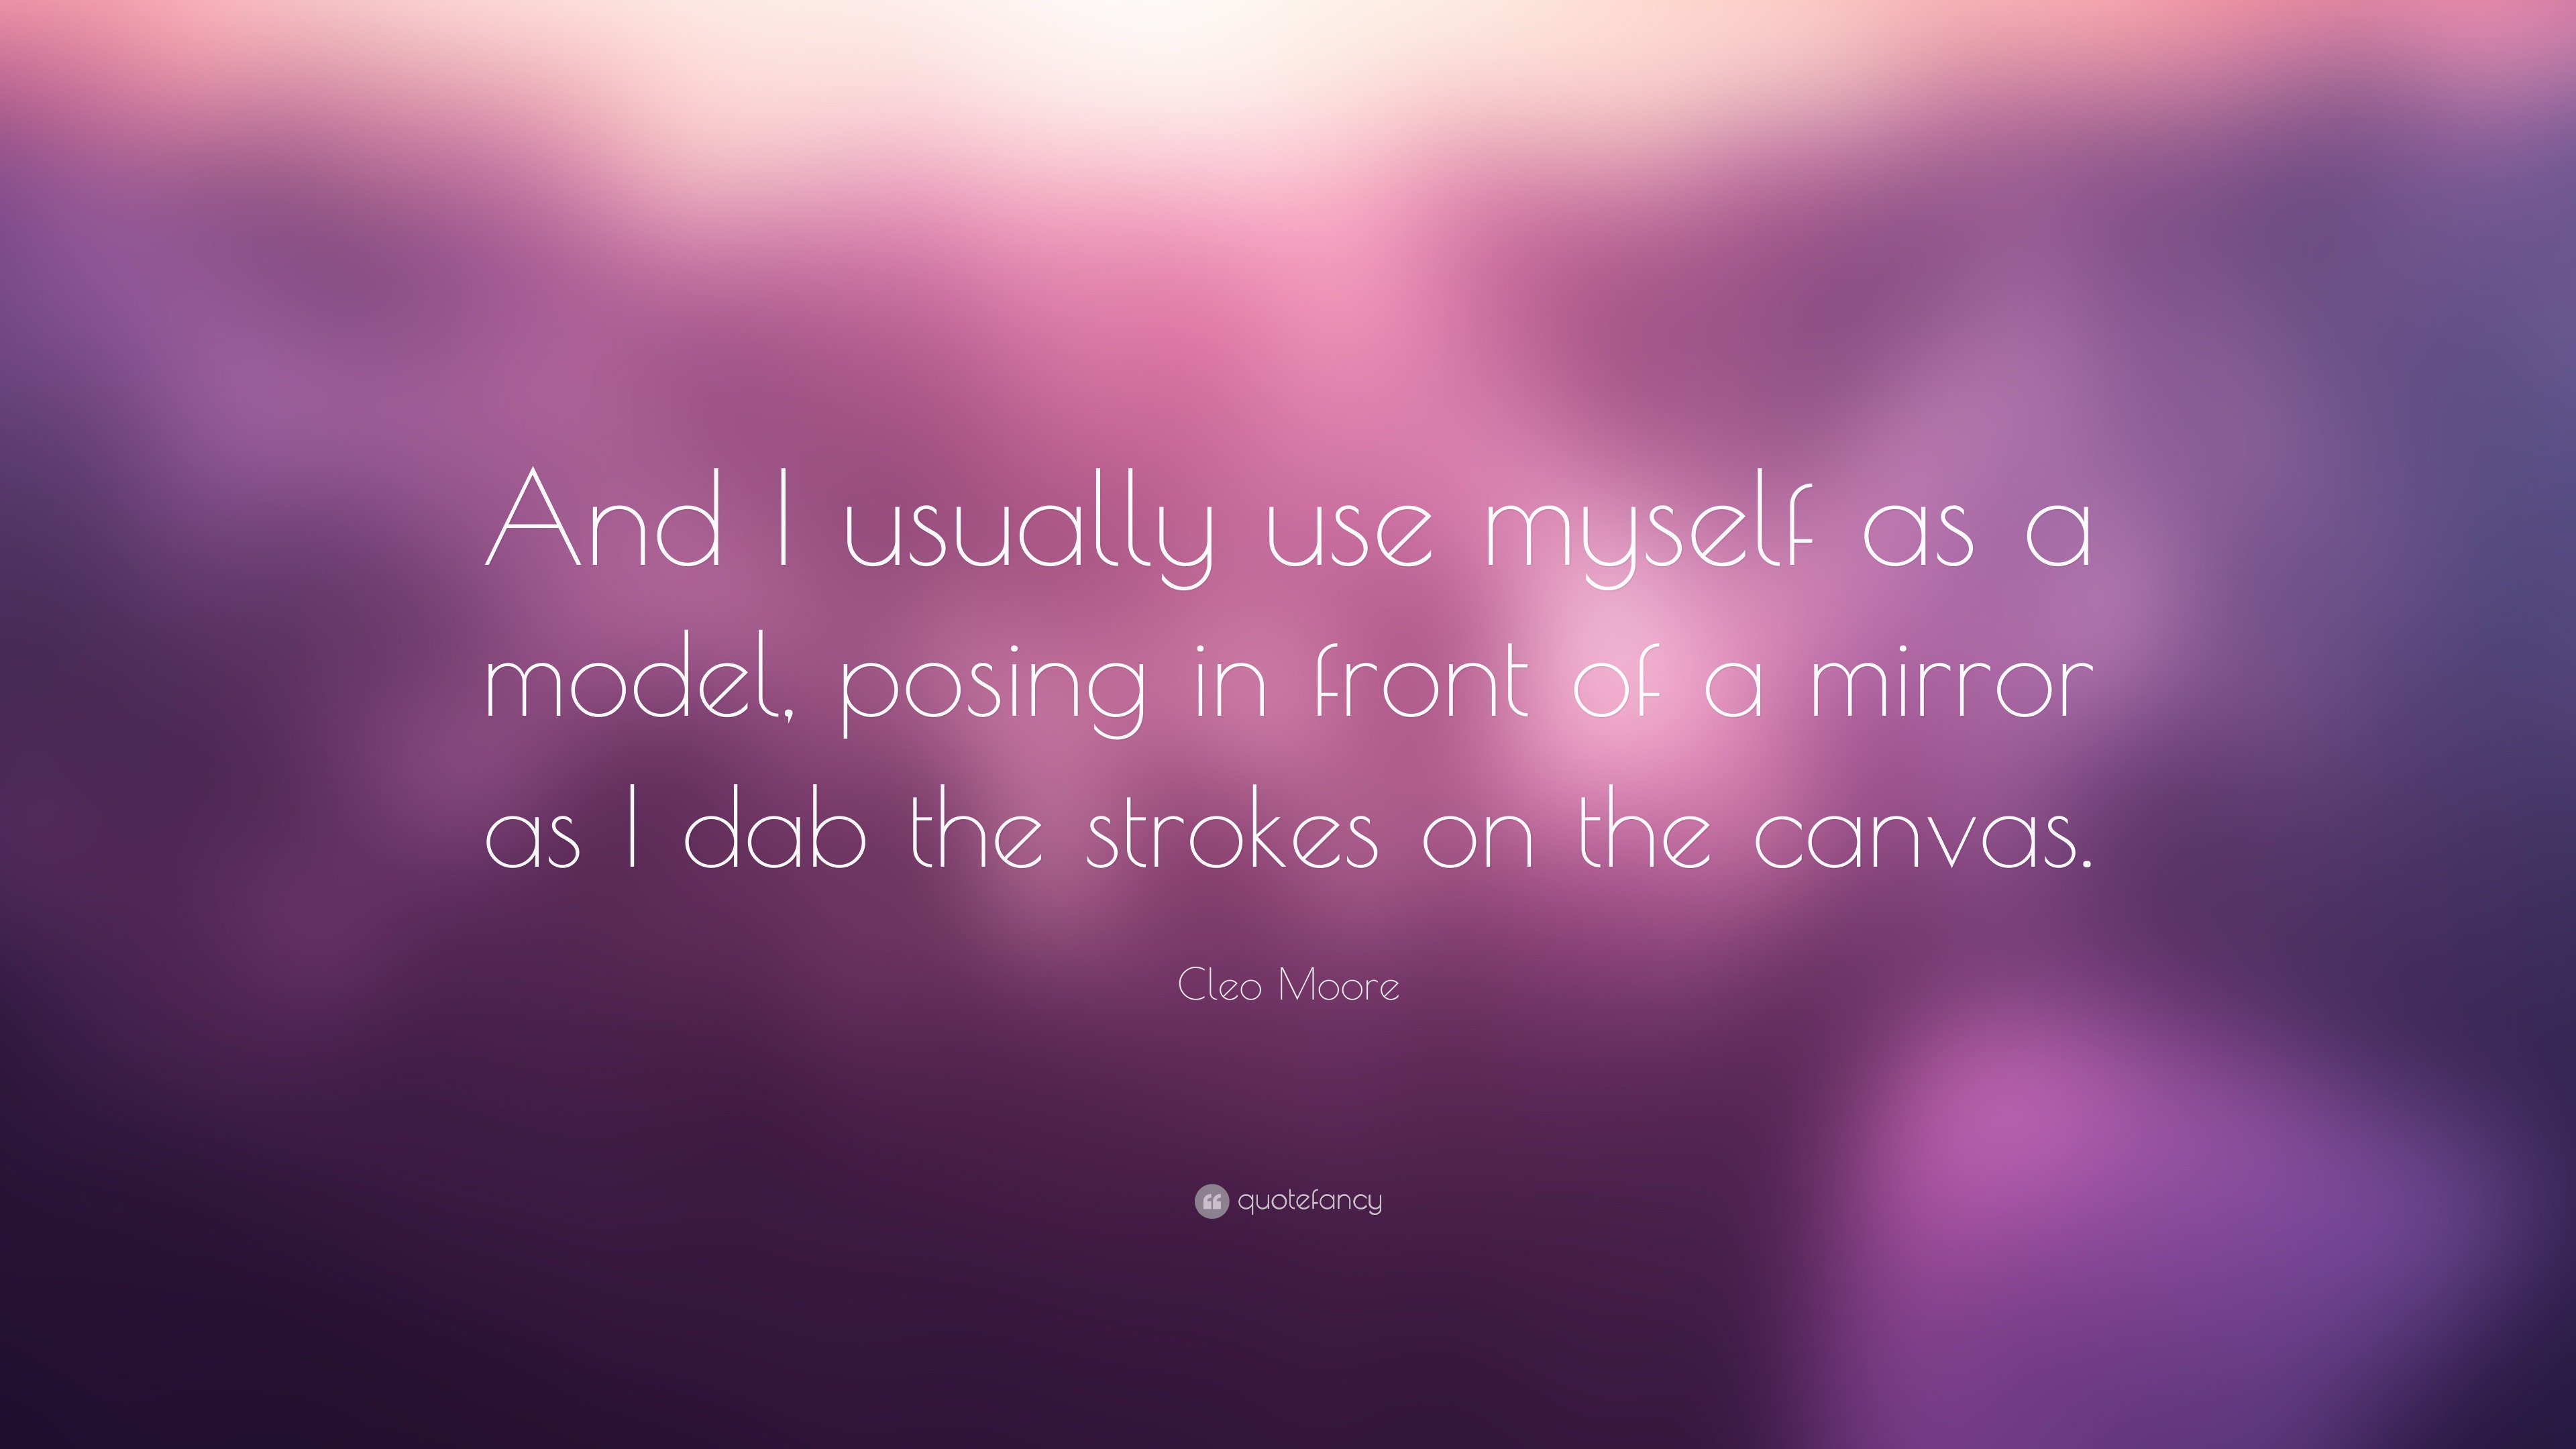 4563415 Cleo Moore Quote And I usually use myself as a model posing in